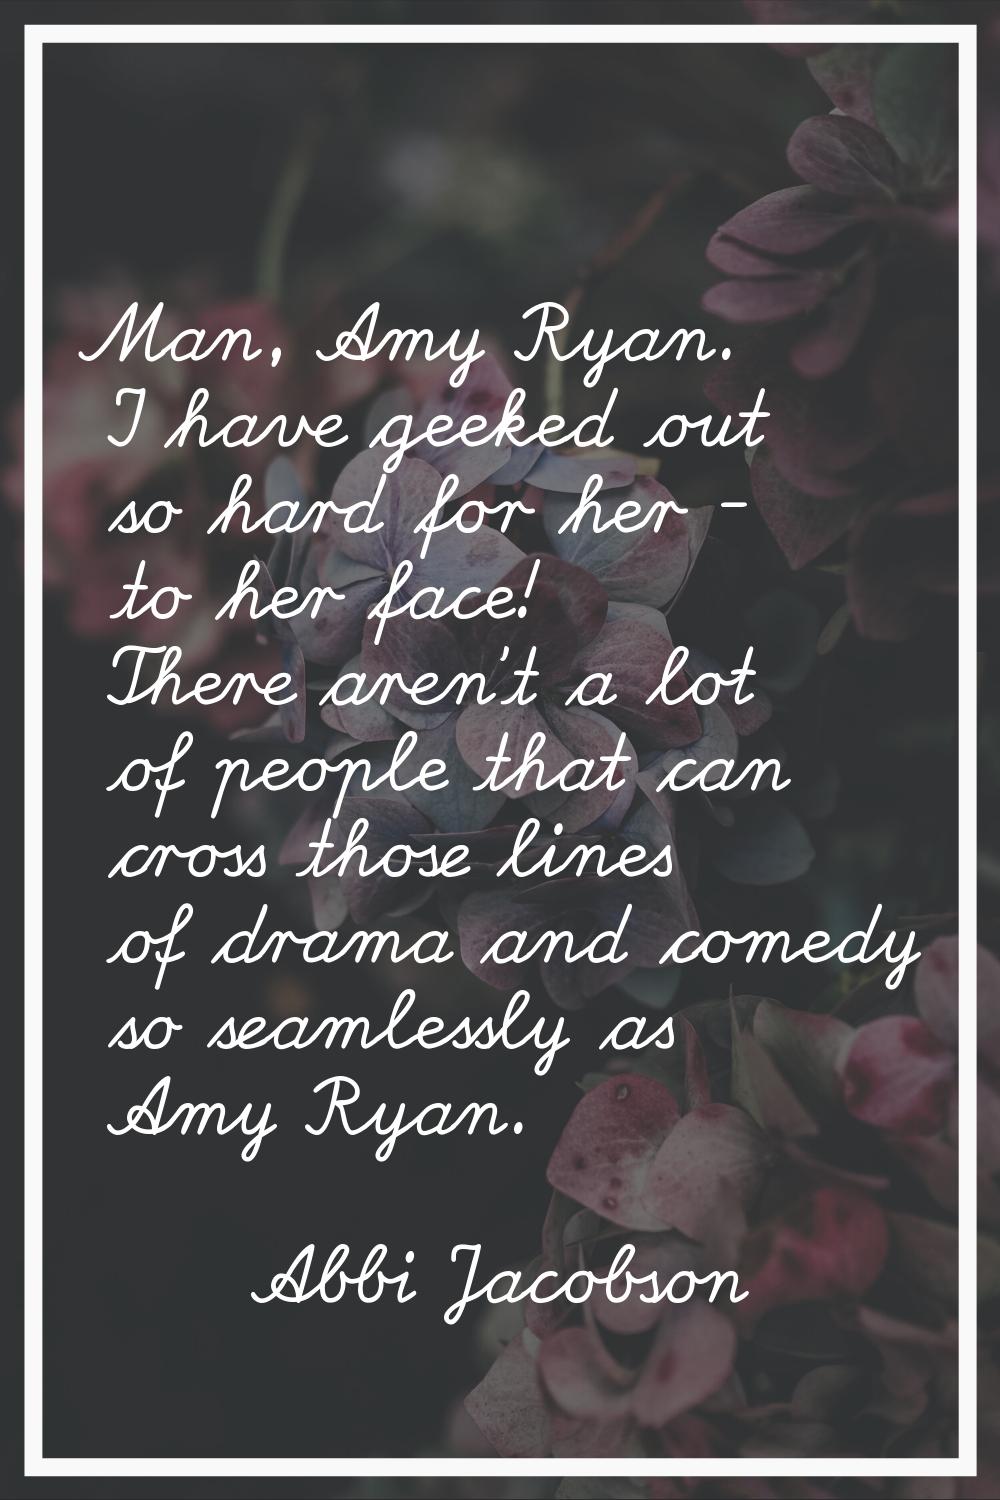 Man, Amy Ryan. I have geeked out so hard for her - to her face! There aren't a lot of people that c